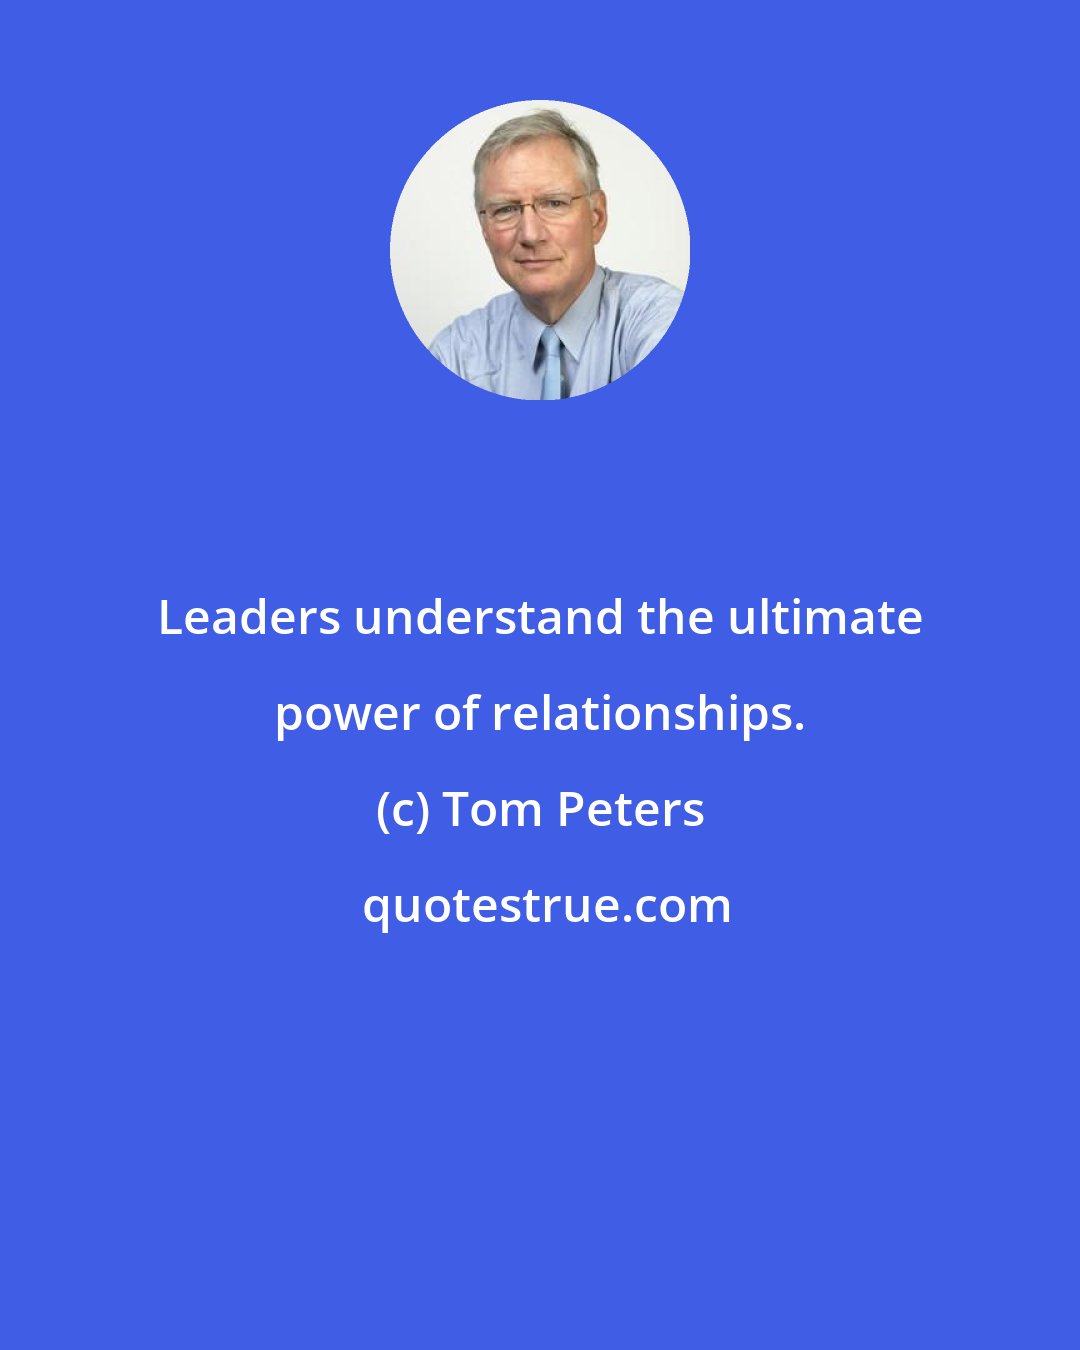 Tom Peters: Leaders understand the ultimate power of relationships.